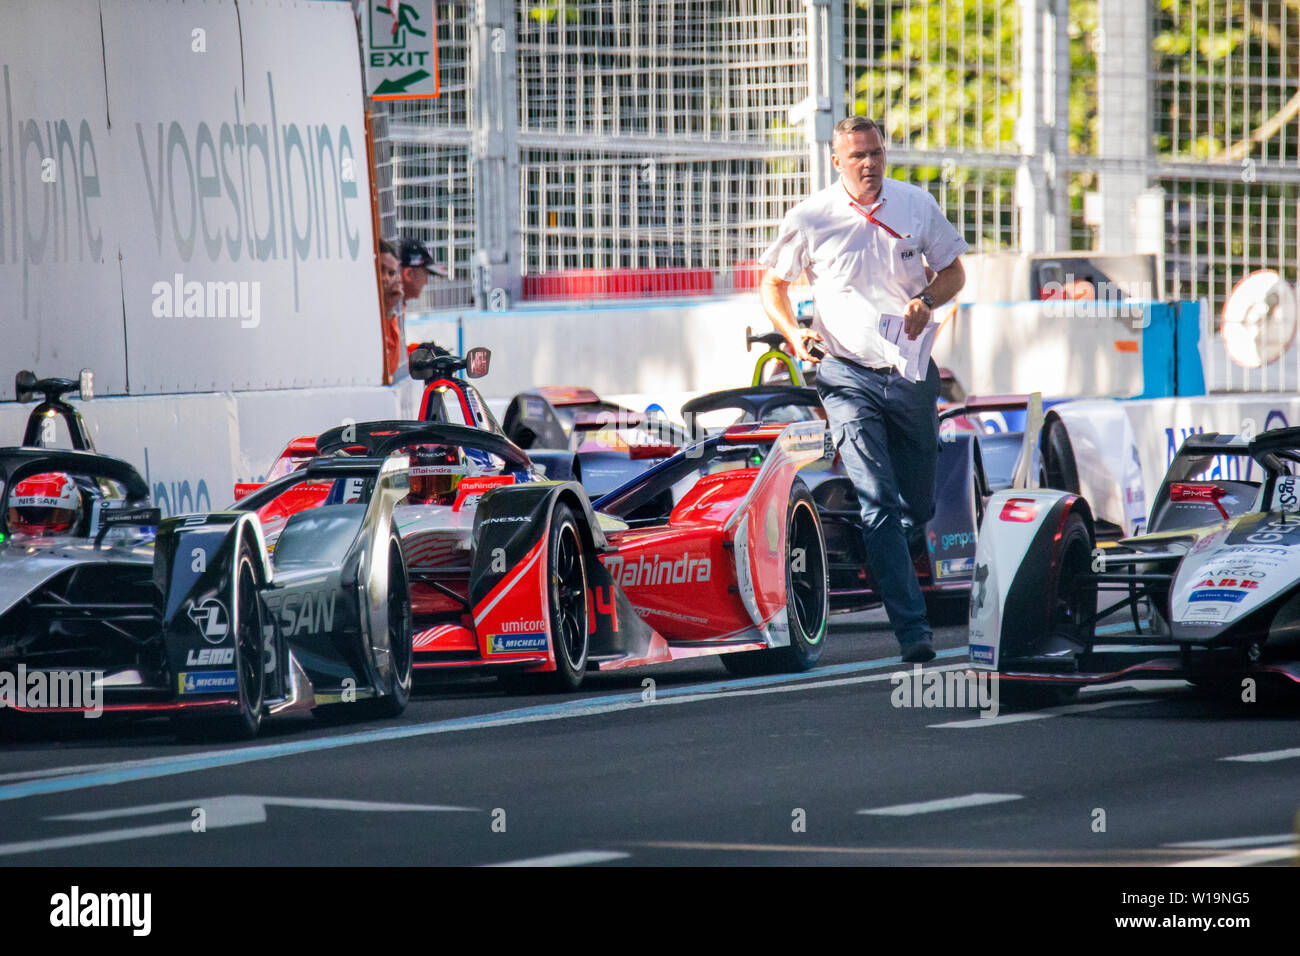 Formula E drivers Sebastian Buemi, Pascal Wehrlein, Sam Bird and Maximilian GÜNTHER being held back by the race direction at the second start attempt of the Julius Bär Formula E race in the swiss capital Bern. Due to a car pile up before turn 1, the race was red flagged and restarted with the original grid position. The decision to use the original grid position was protested by several of the drivers who lost positions they had gained. Stock Photo